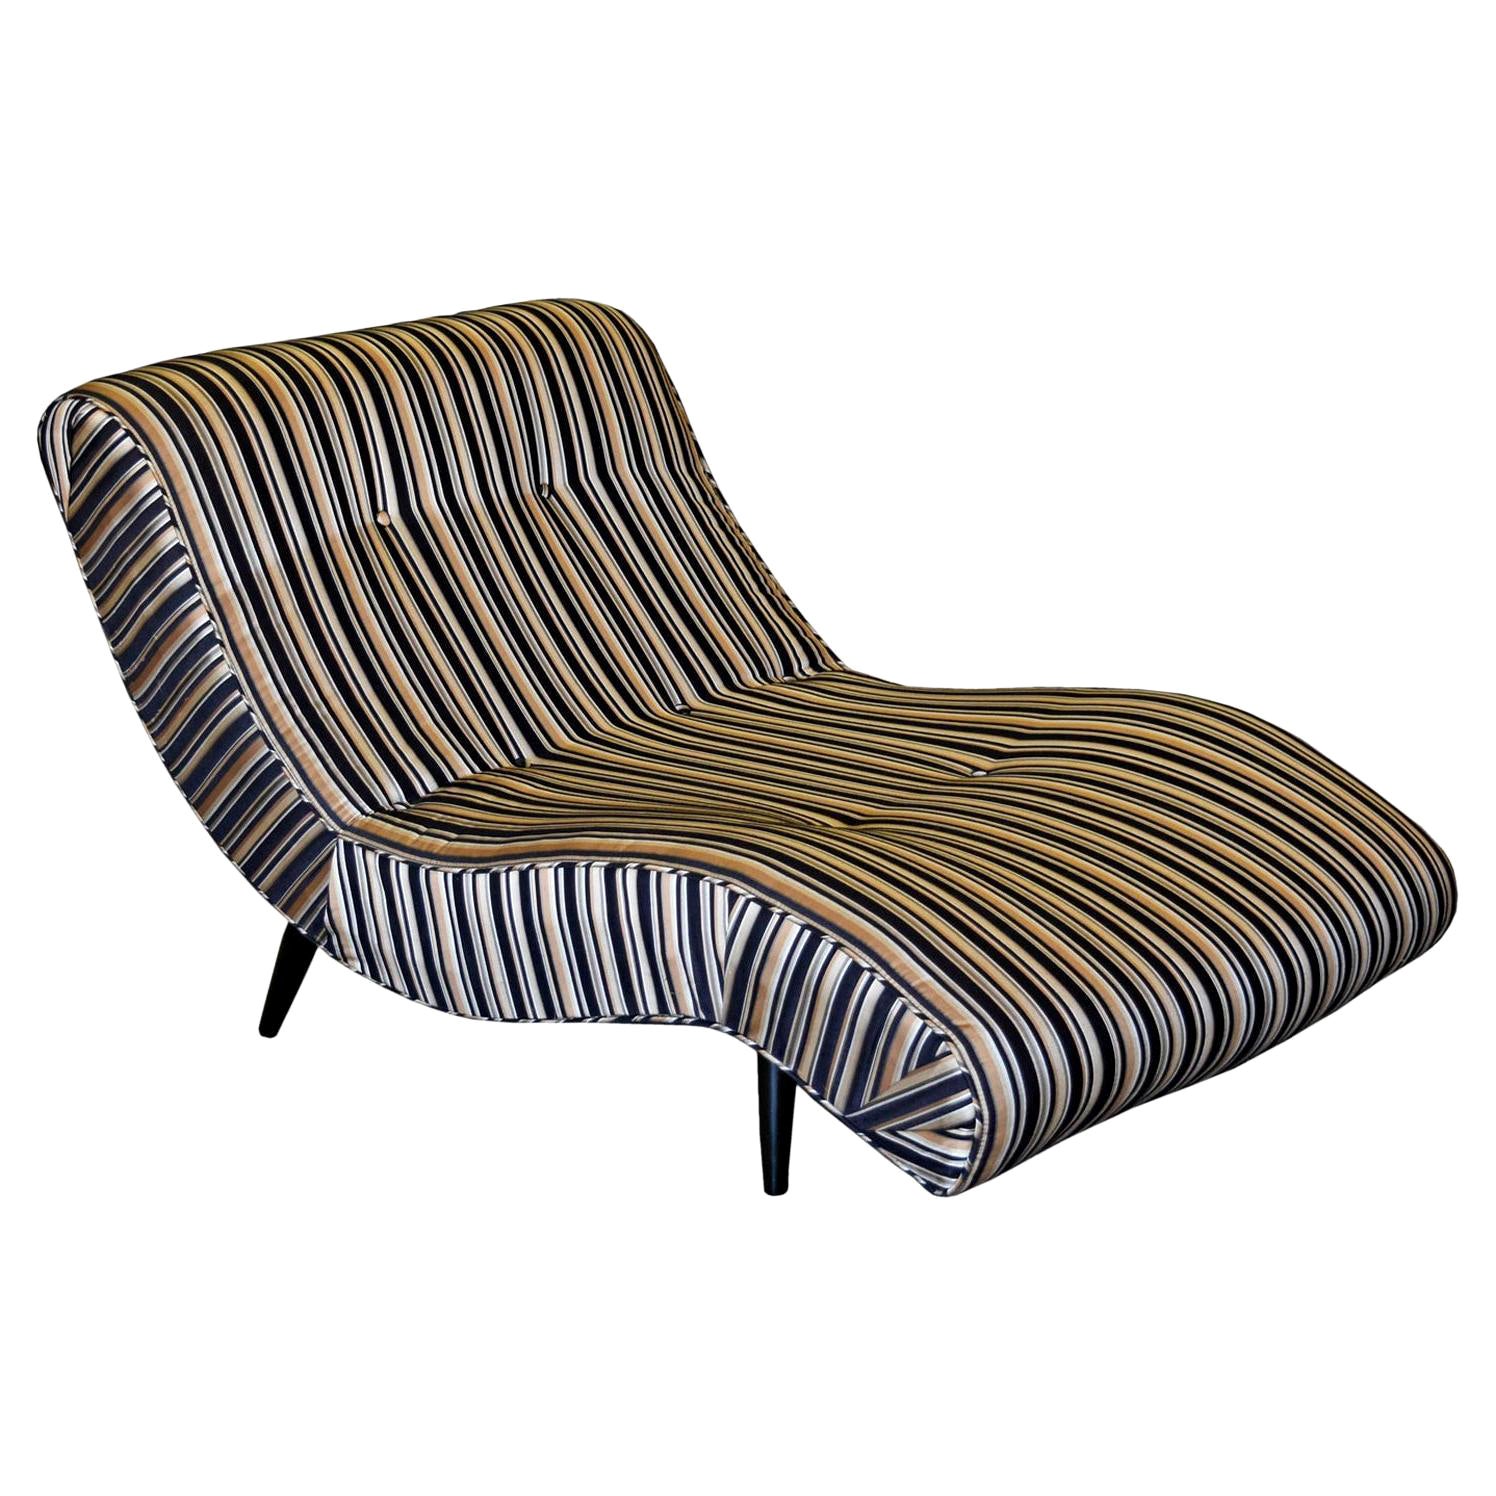 Vintage Adrian Pearsall Scoop Wave Chaise Lounge Chair